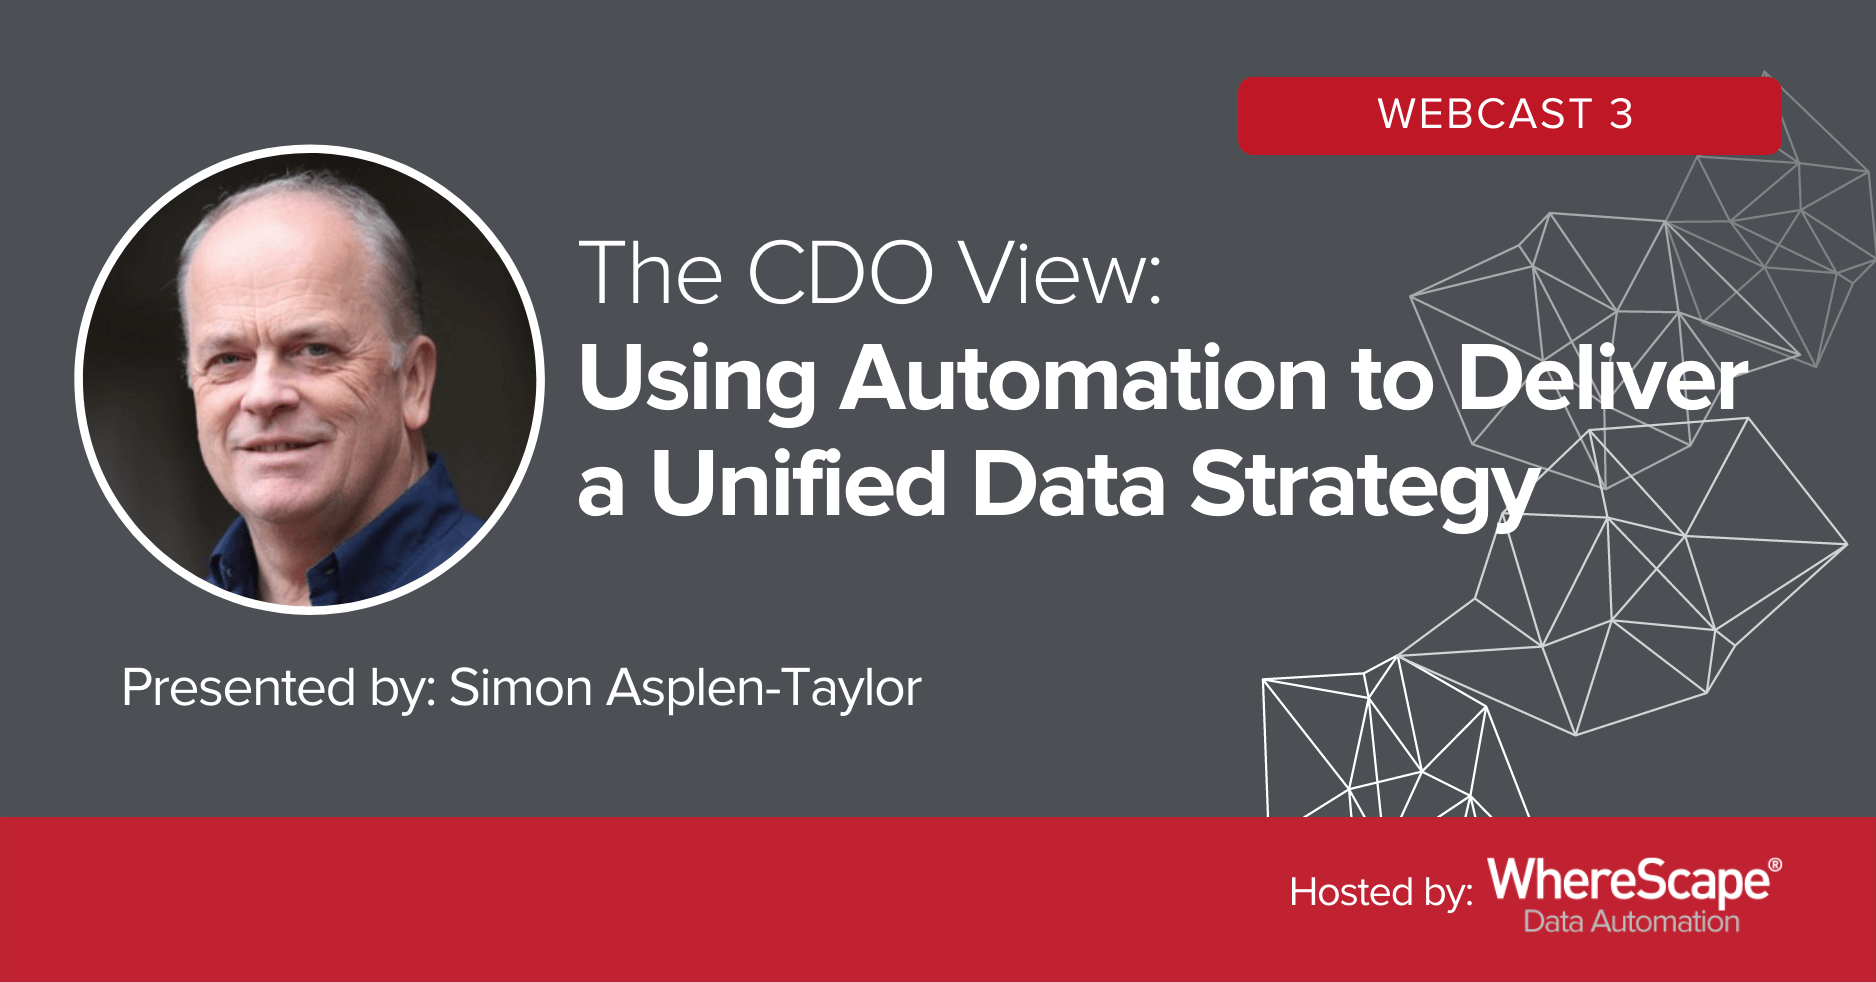 The CDO View: Using Automation to Deliver a Unified Data Strategy